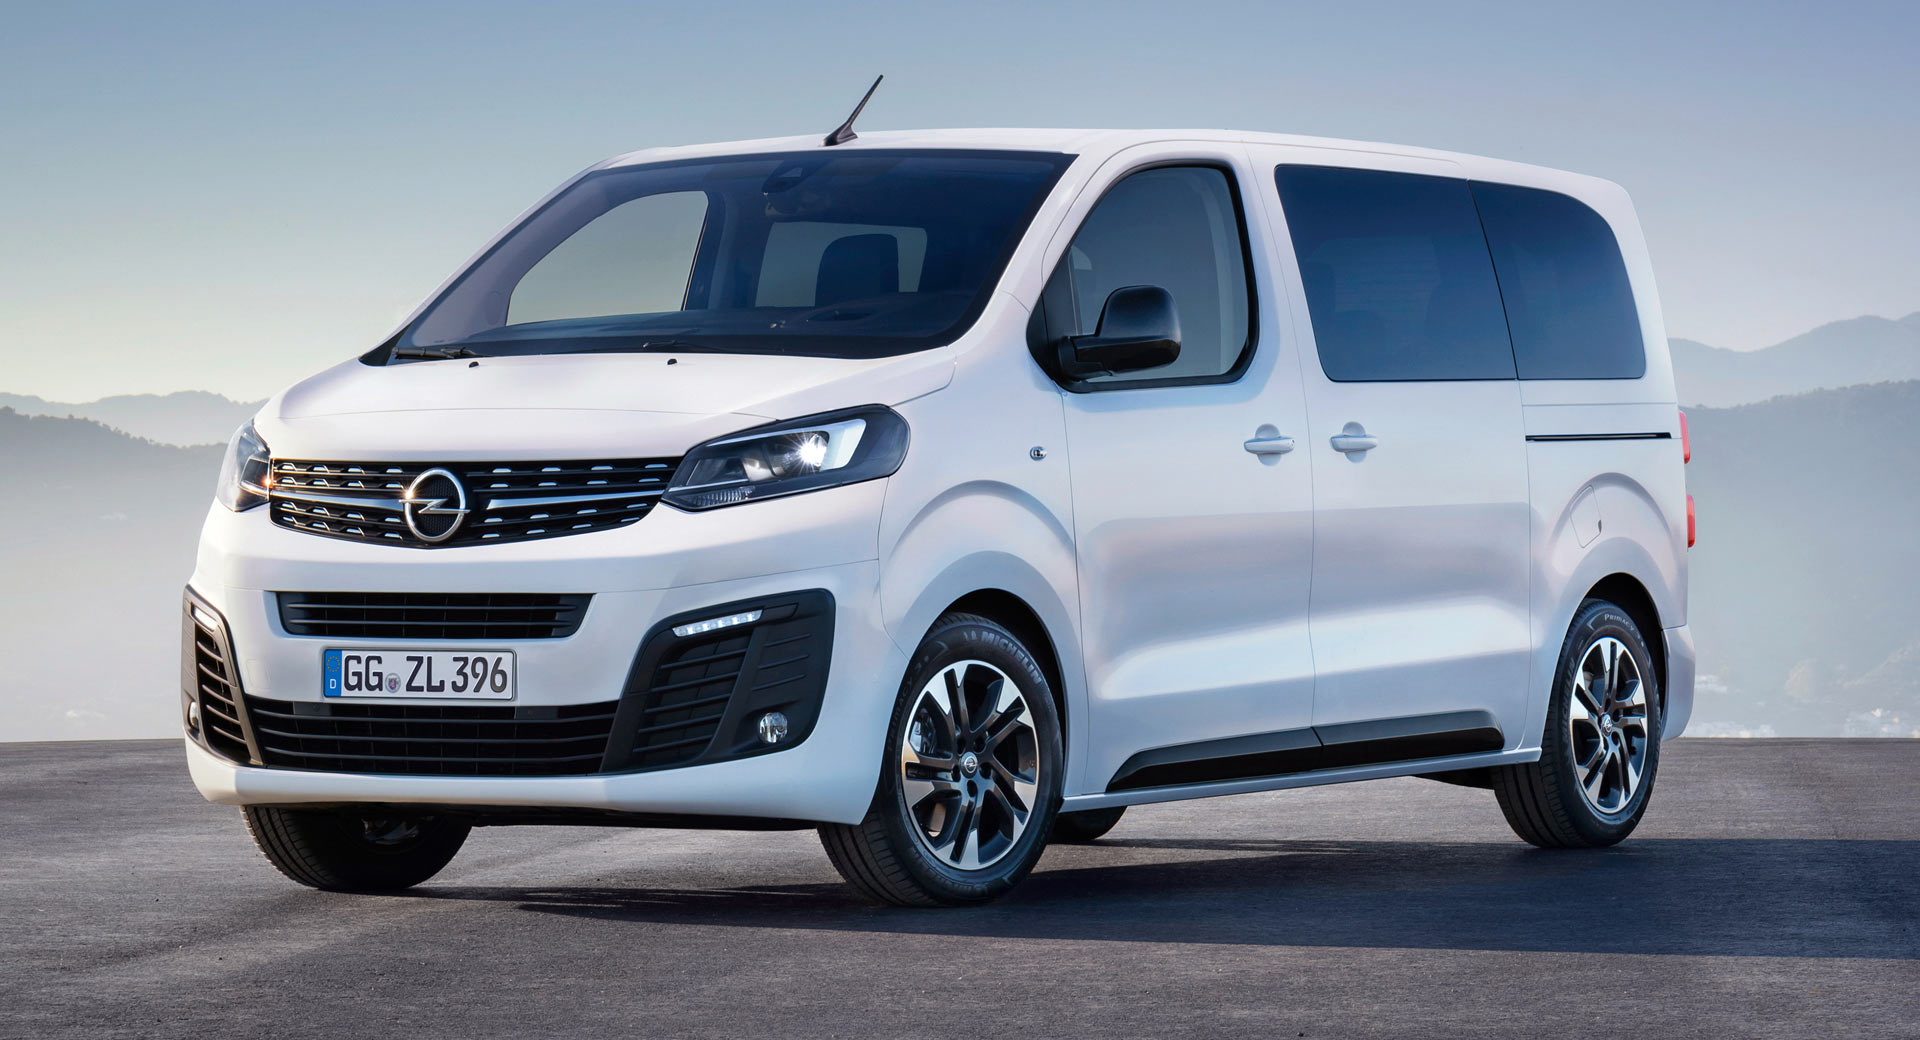 New Opel Zafira Life Is The Minivan Version Of The Next PSABased